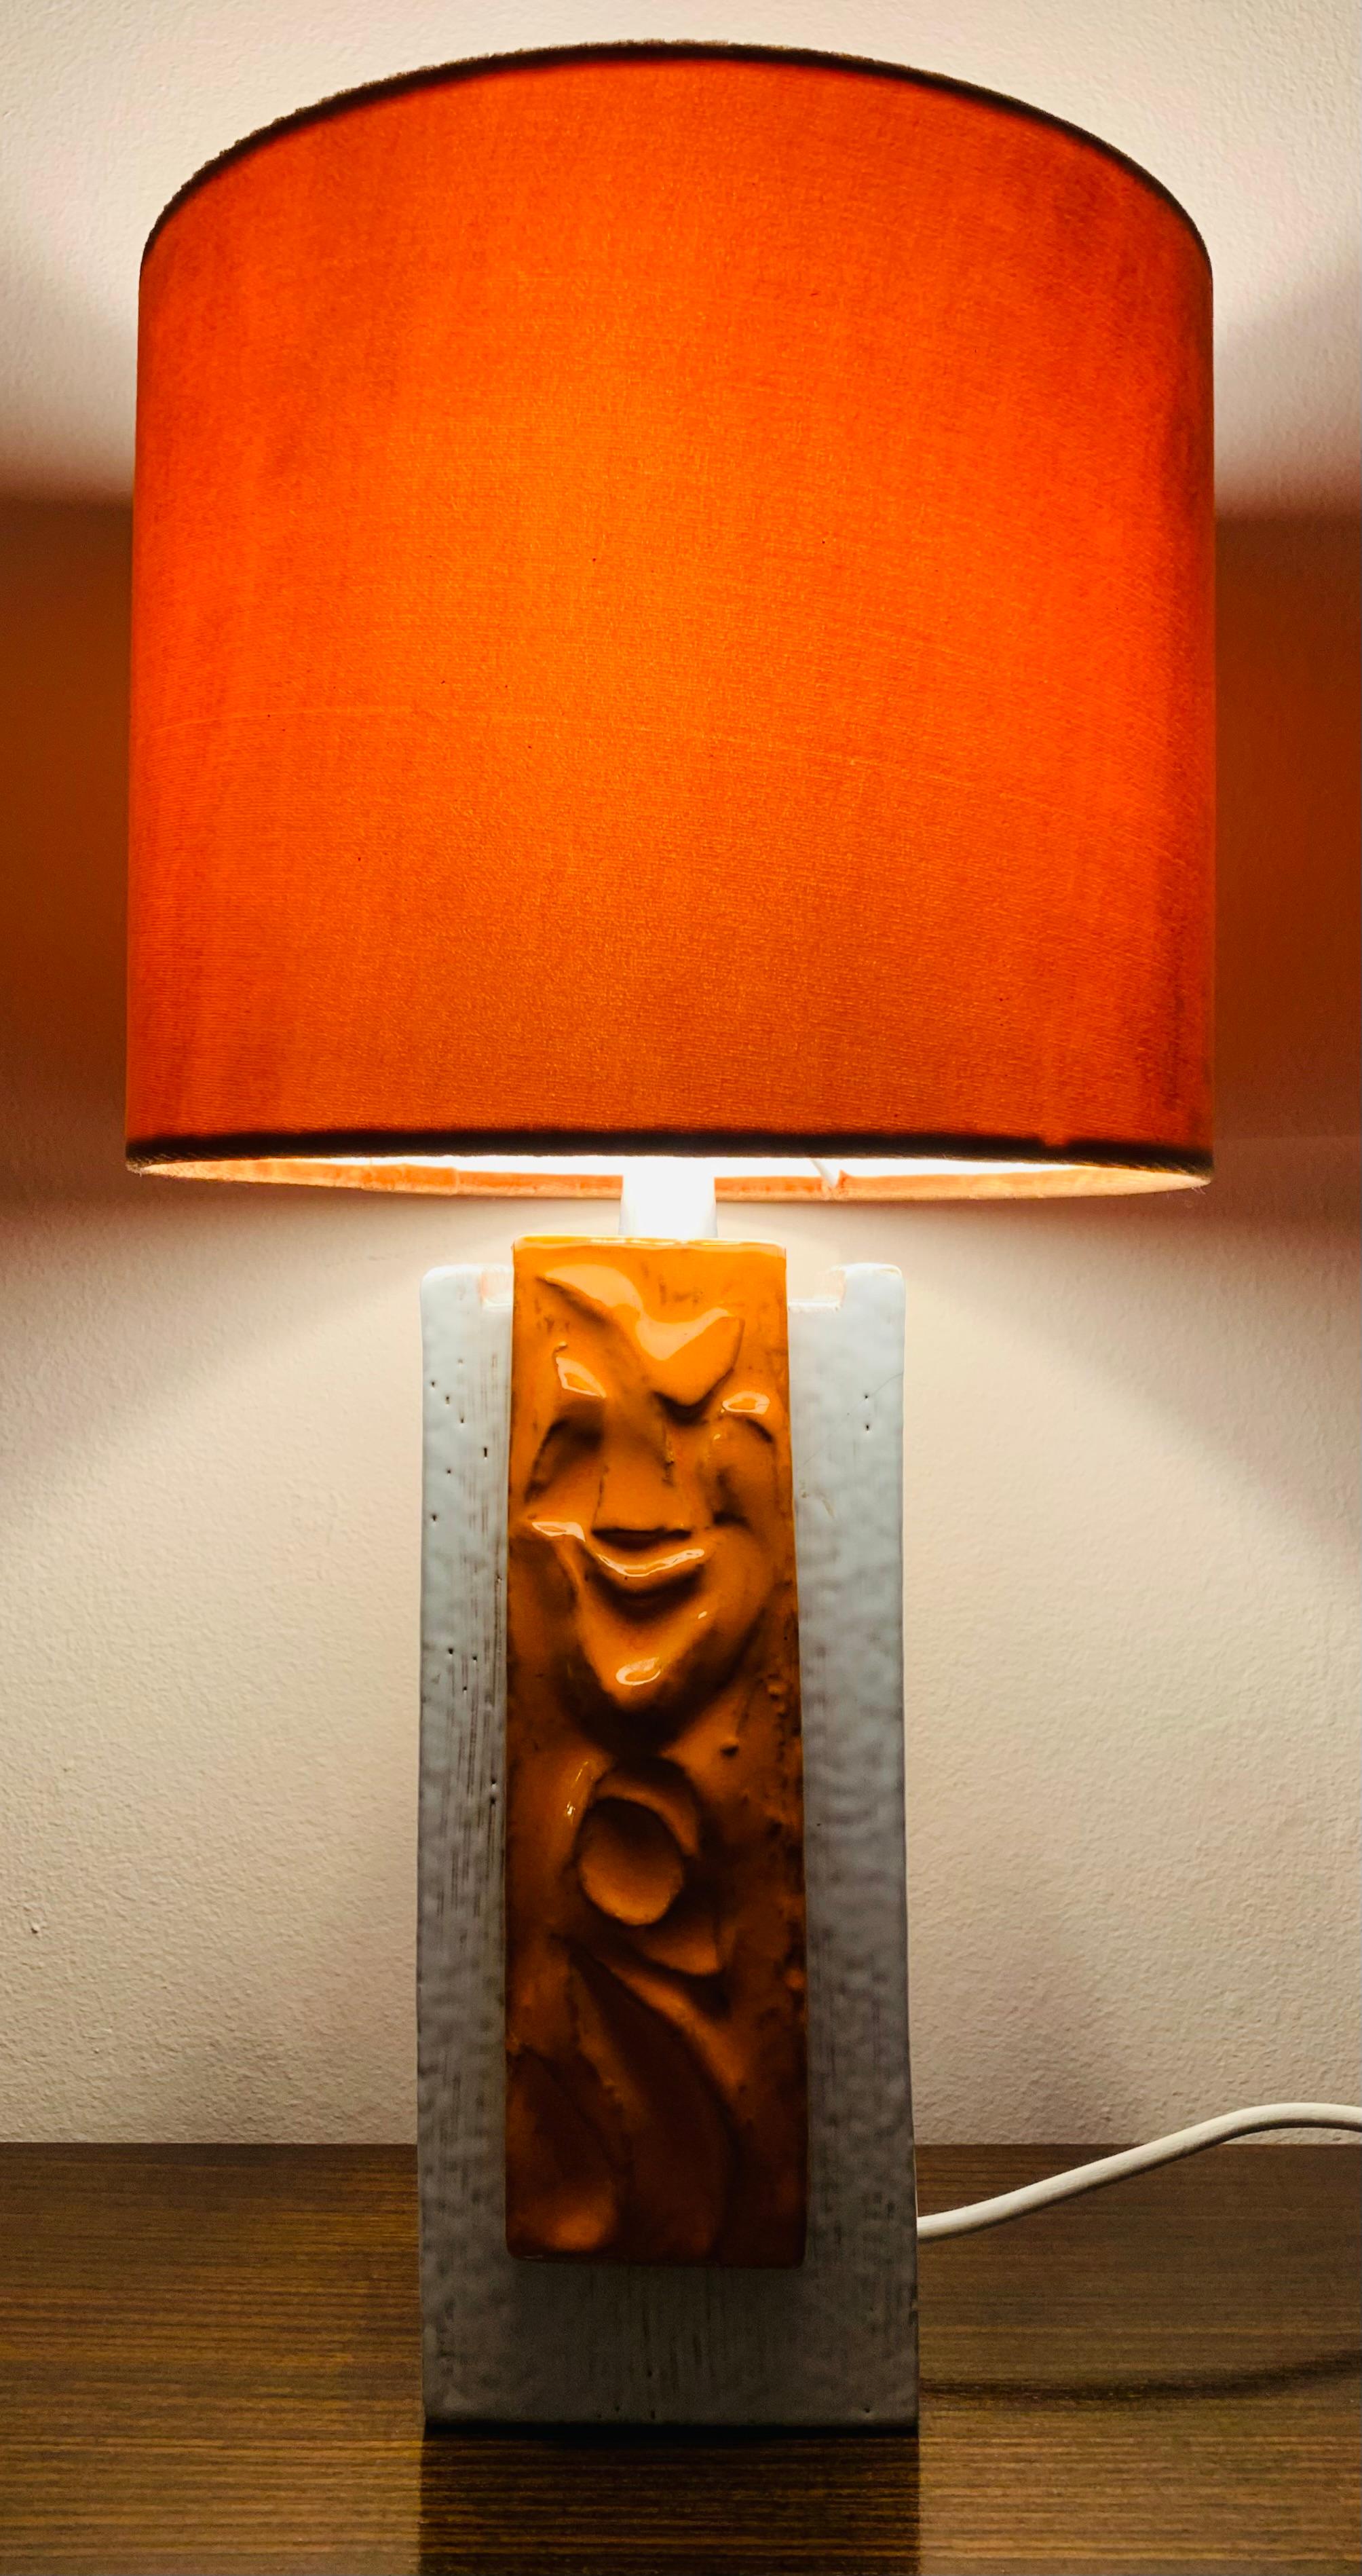 1970s German ceramic table lamp including a velvet orange shade. An orange glazed feature abstract 3-D tile sits on opposite sides of the square white base with vertical incised lines. In very good vintage condition. The lamp has been rewired with a